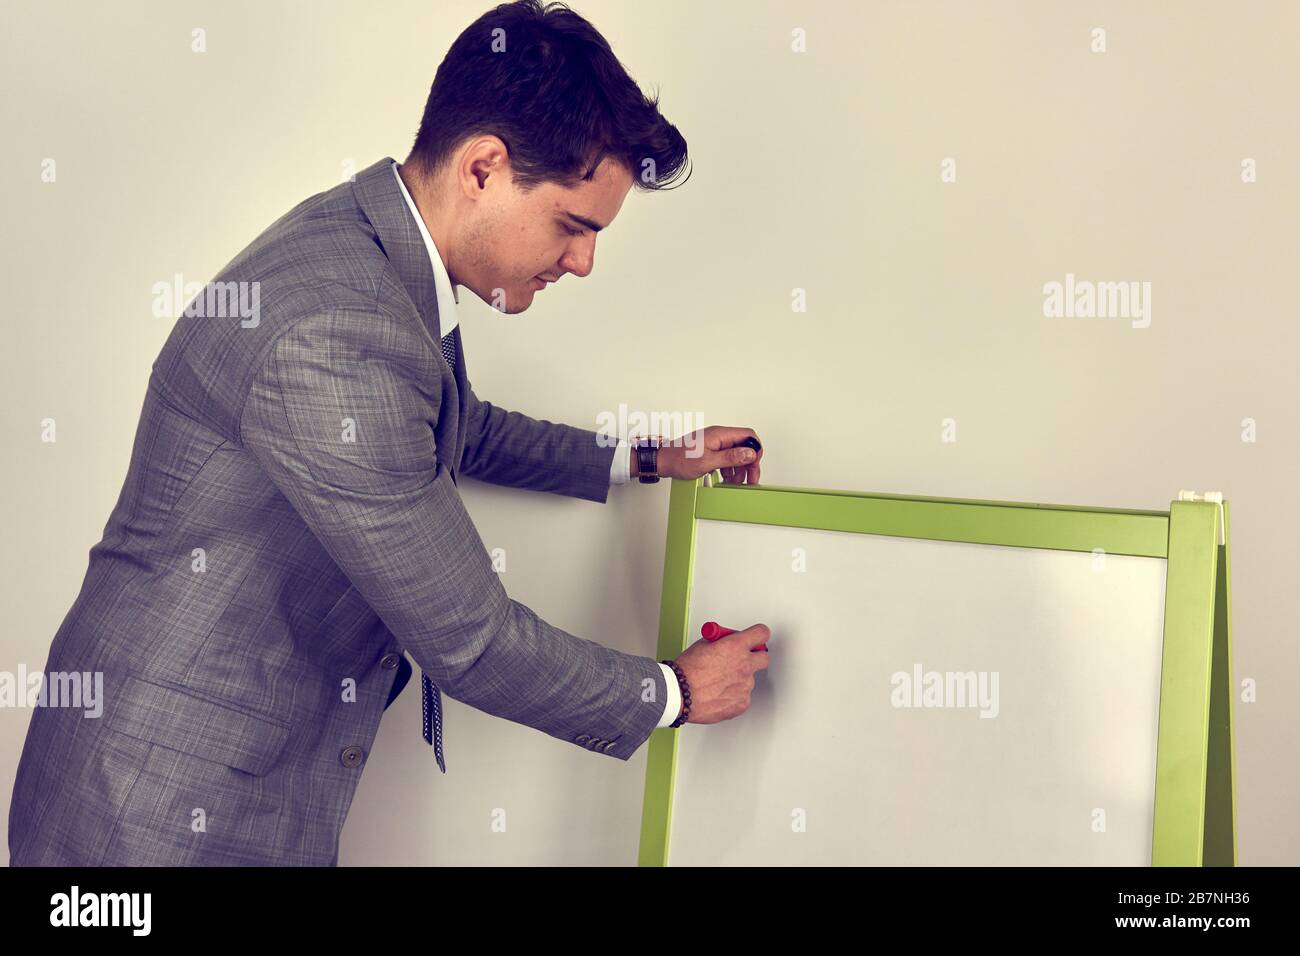 Young man writing on whiteboard Stock Photo